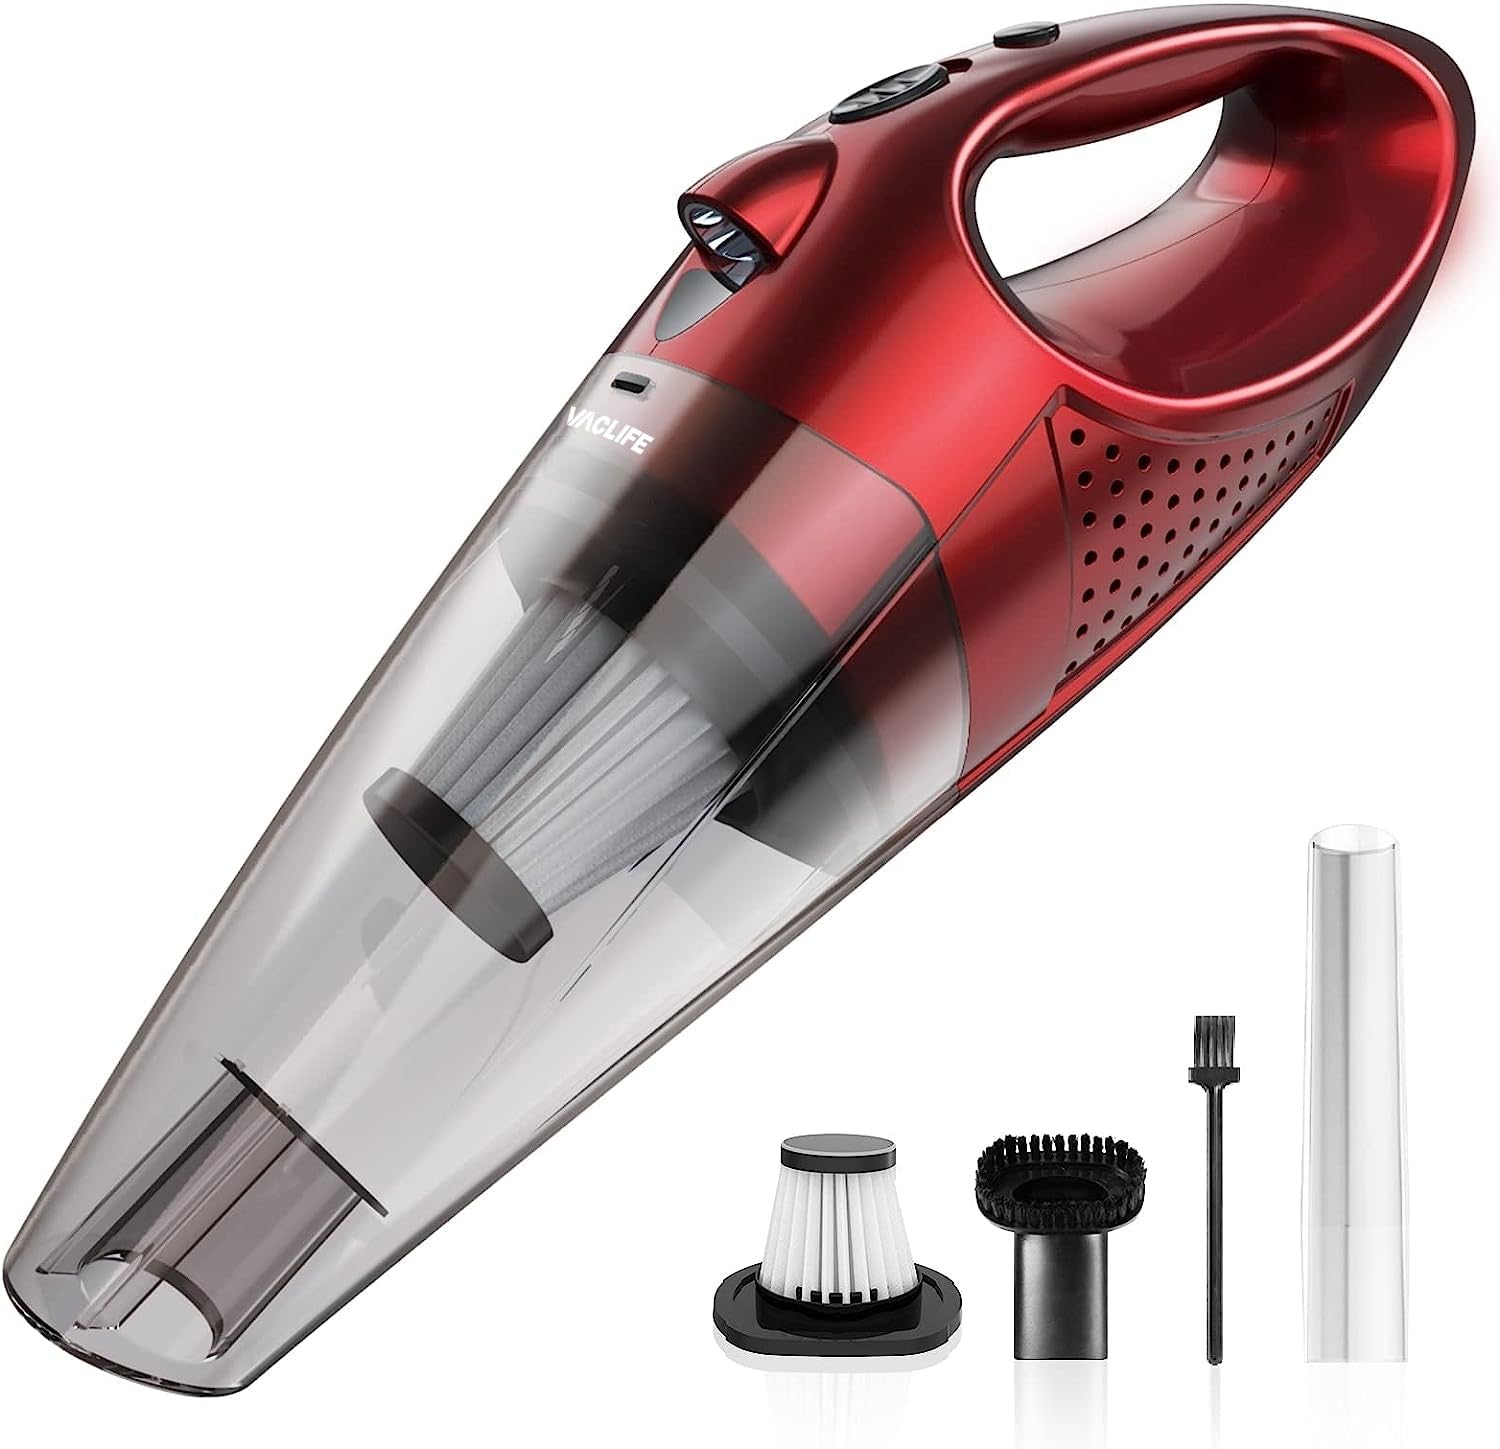 VacLife Handheld Vacuum, Car Hand Vacuum Cleaner Cordless, Mini Portable Rechargeable Vacuum Cleaner with 2 Filters, Streamer Red (VL189)